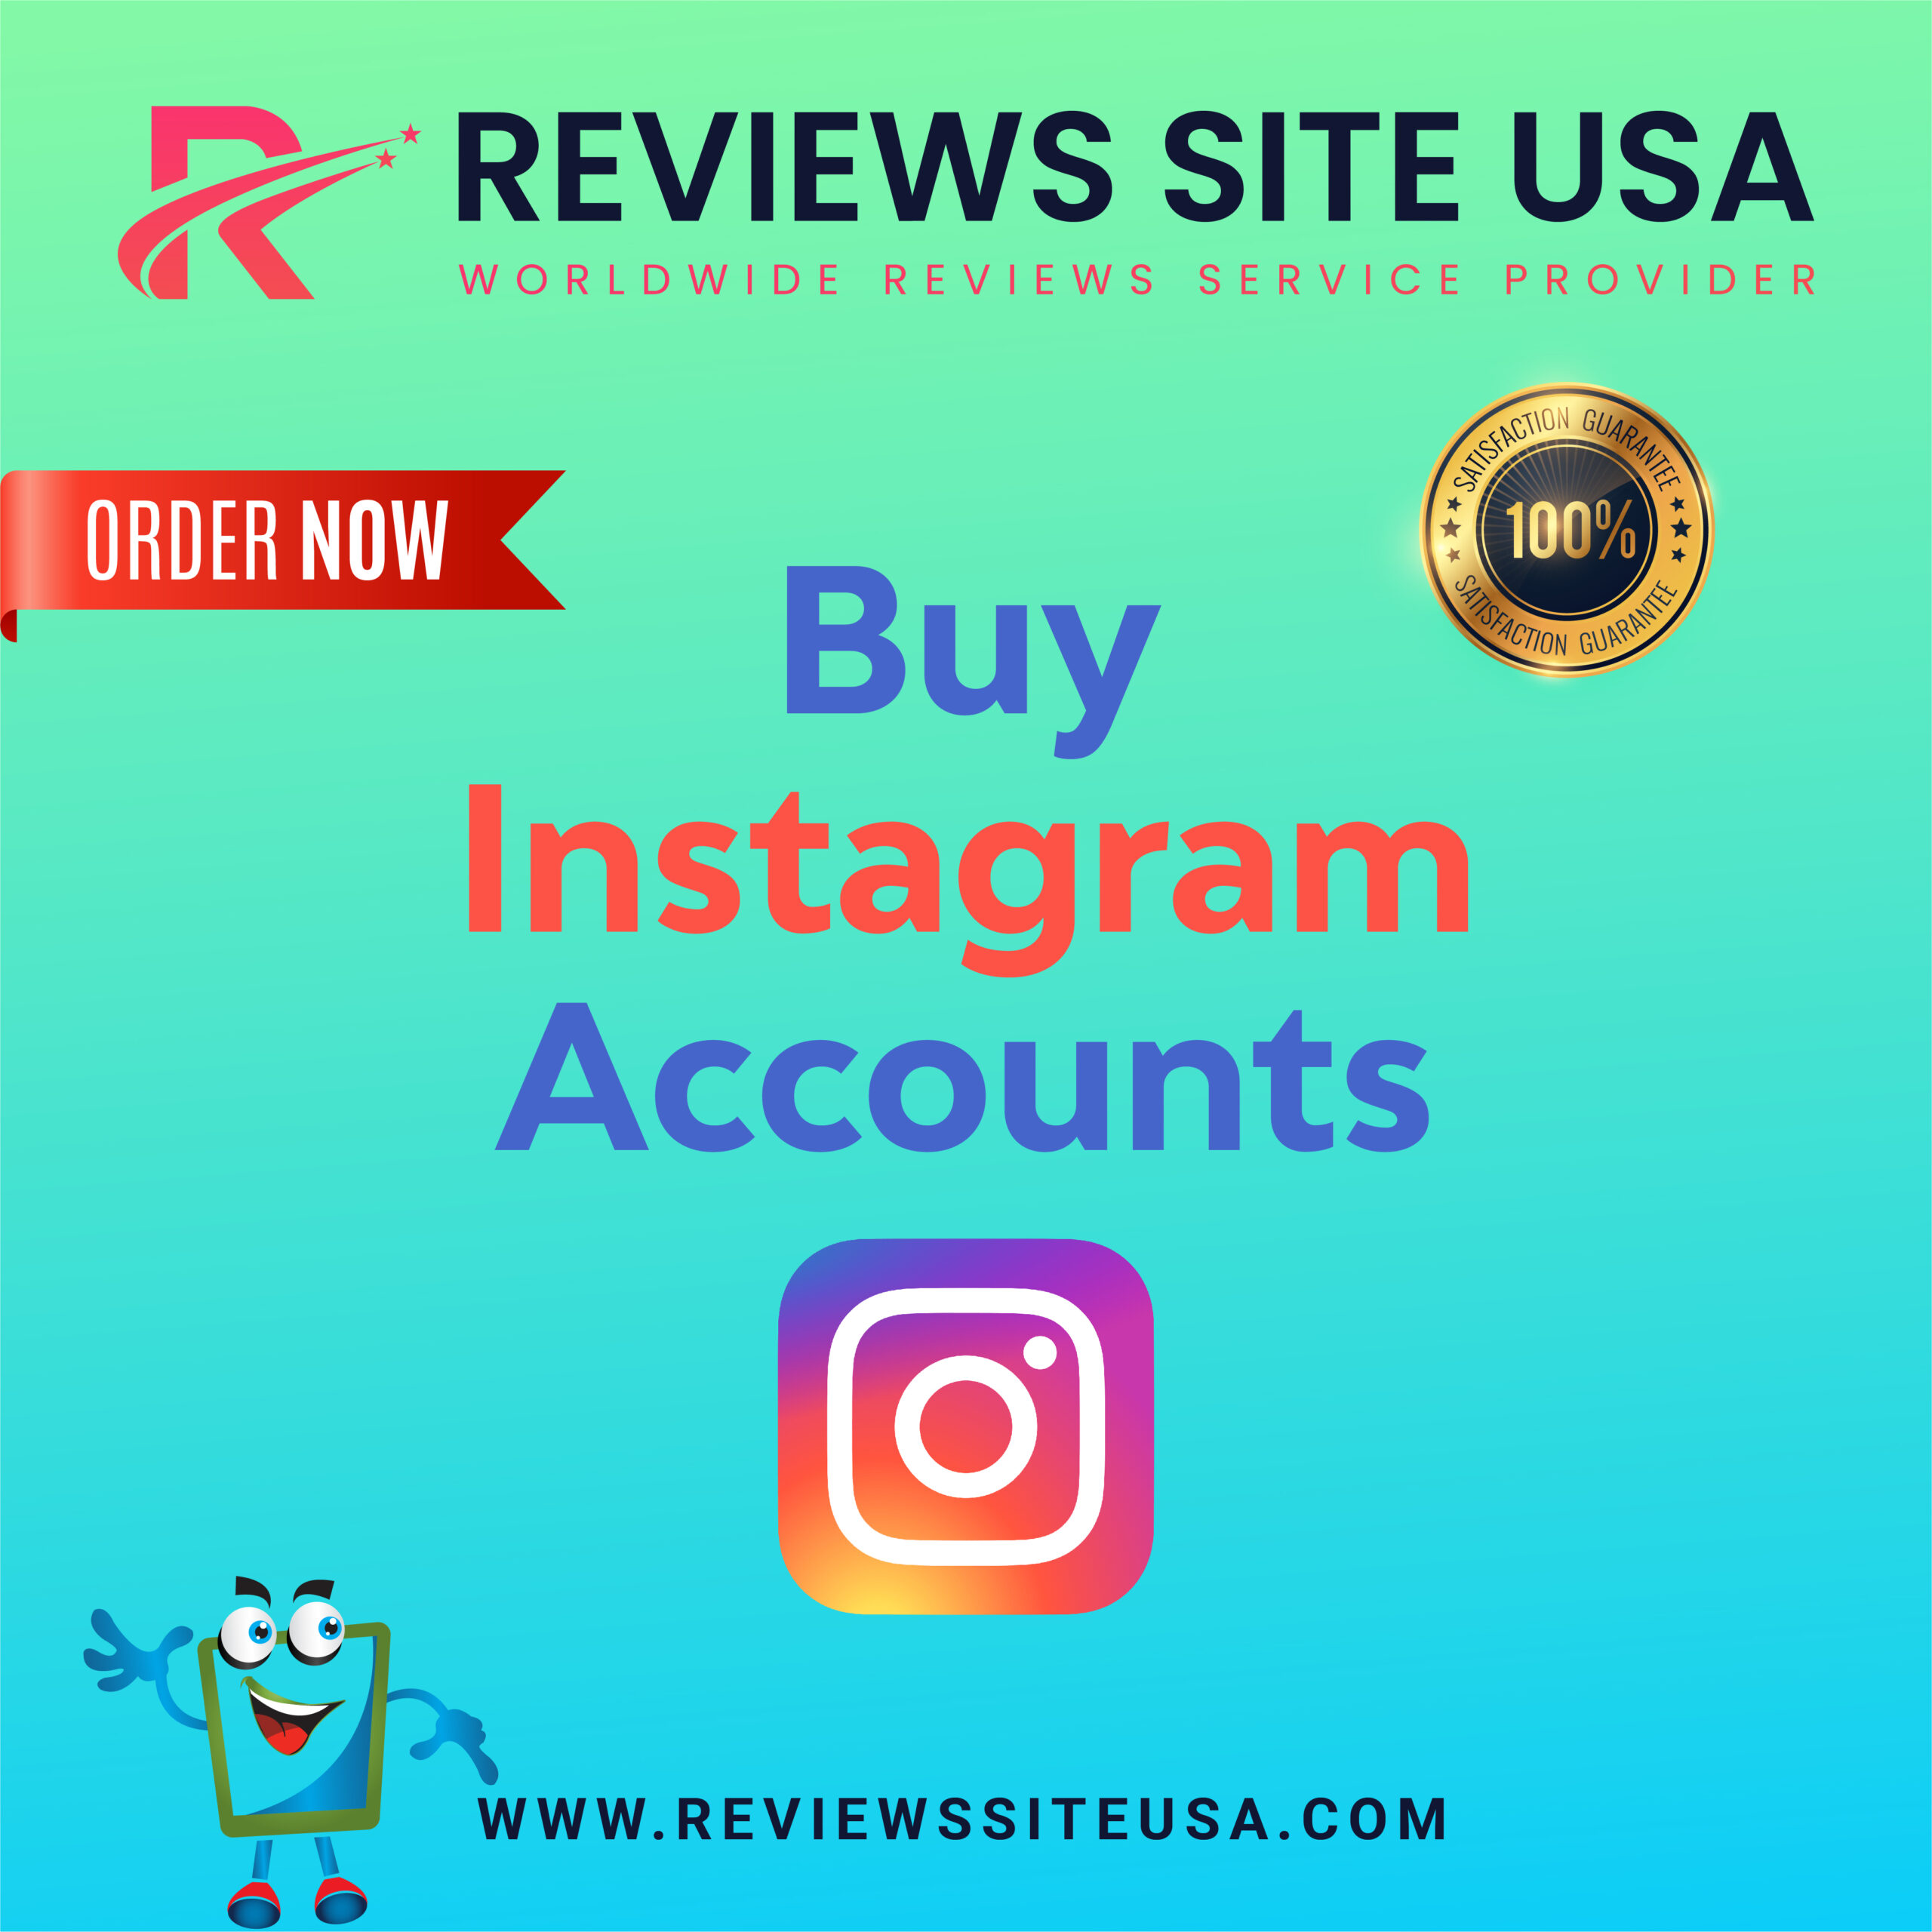 Buy Instagram Accounts - PVA, Aged IG accounts for sells